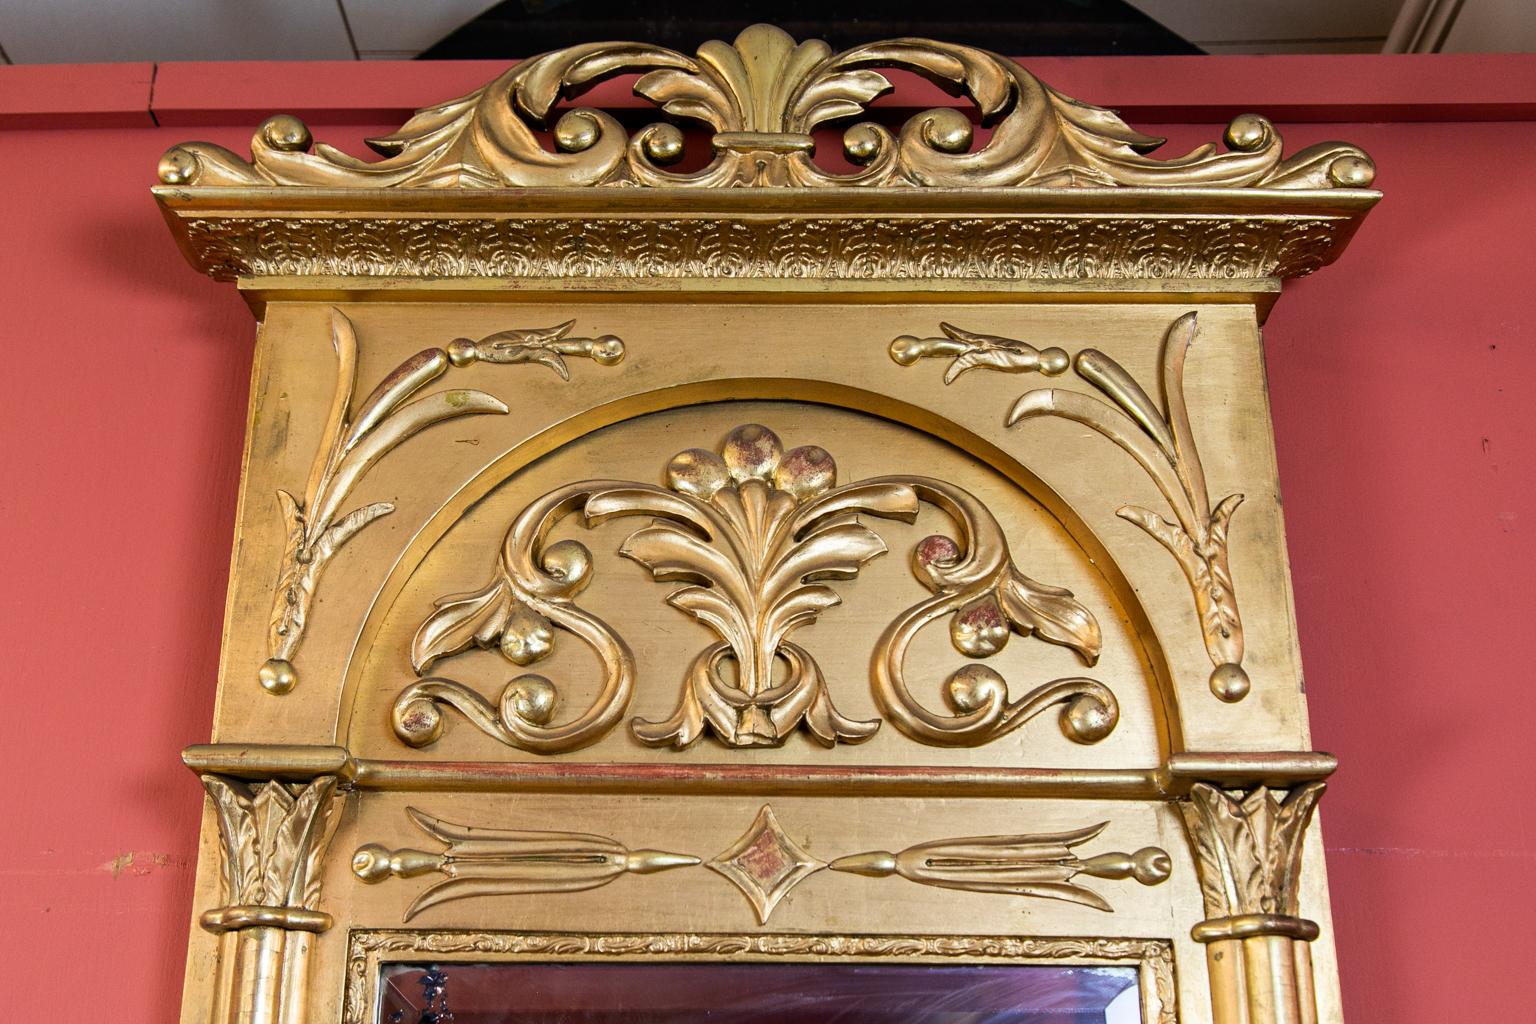 Beveled English gilt Regency mirror, the sides framed with cluster columns topped with acanthus leaf capitals. The crest has a stylized fleur-de-lis surrounded by floral arabesques. It has some spots of deterioration in the silvering.
  